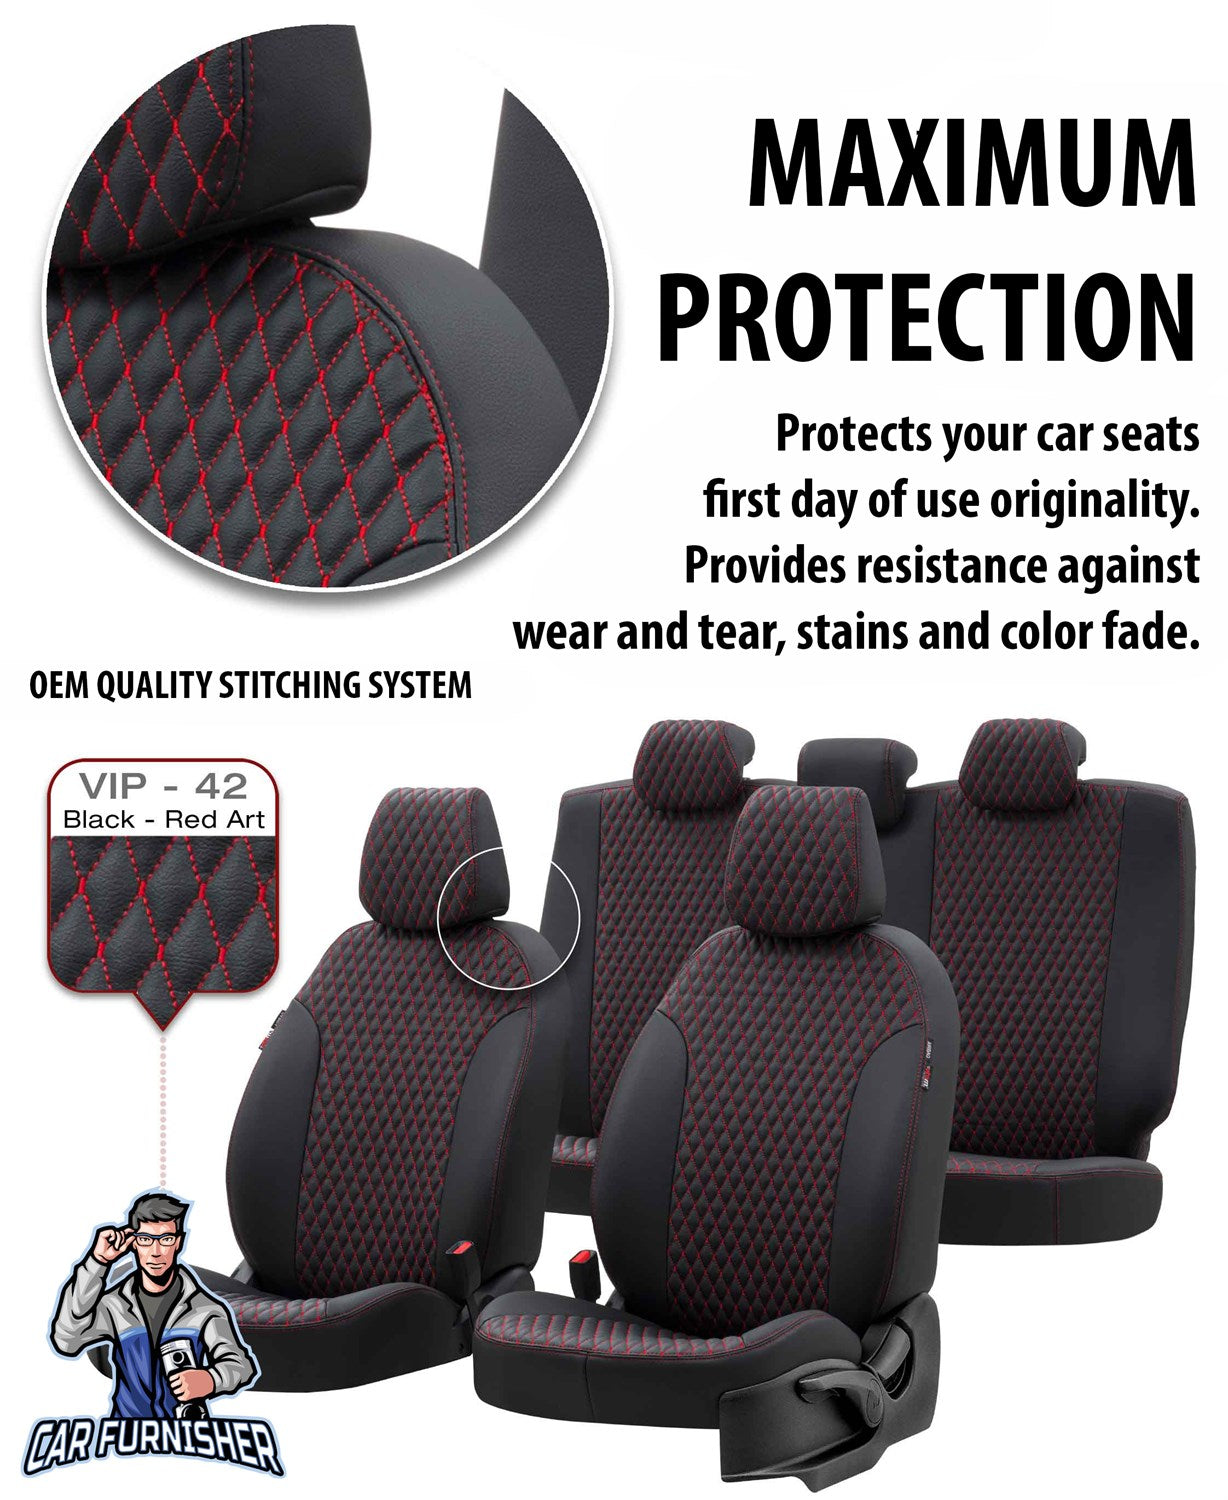 Nissan Almera Seat Covers Amsterdam Leather Design Black Leather